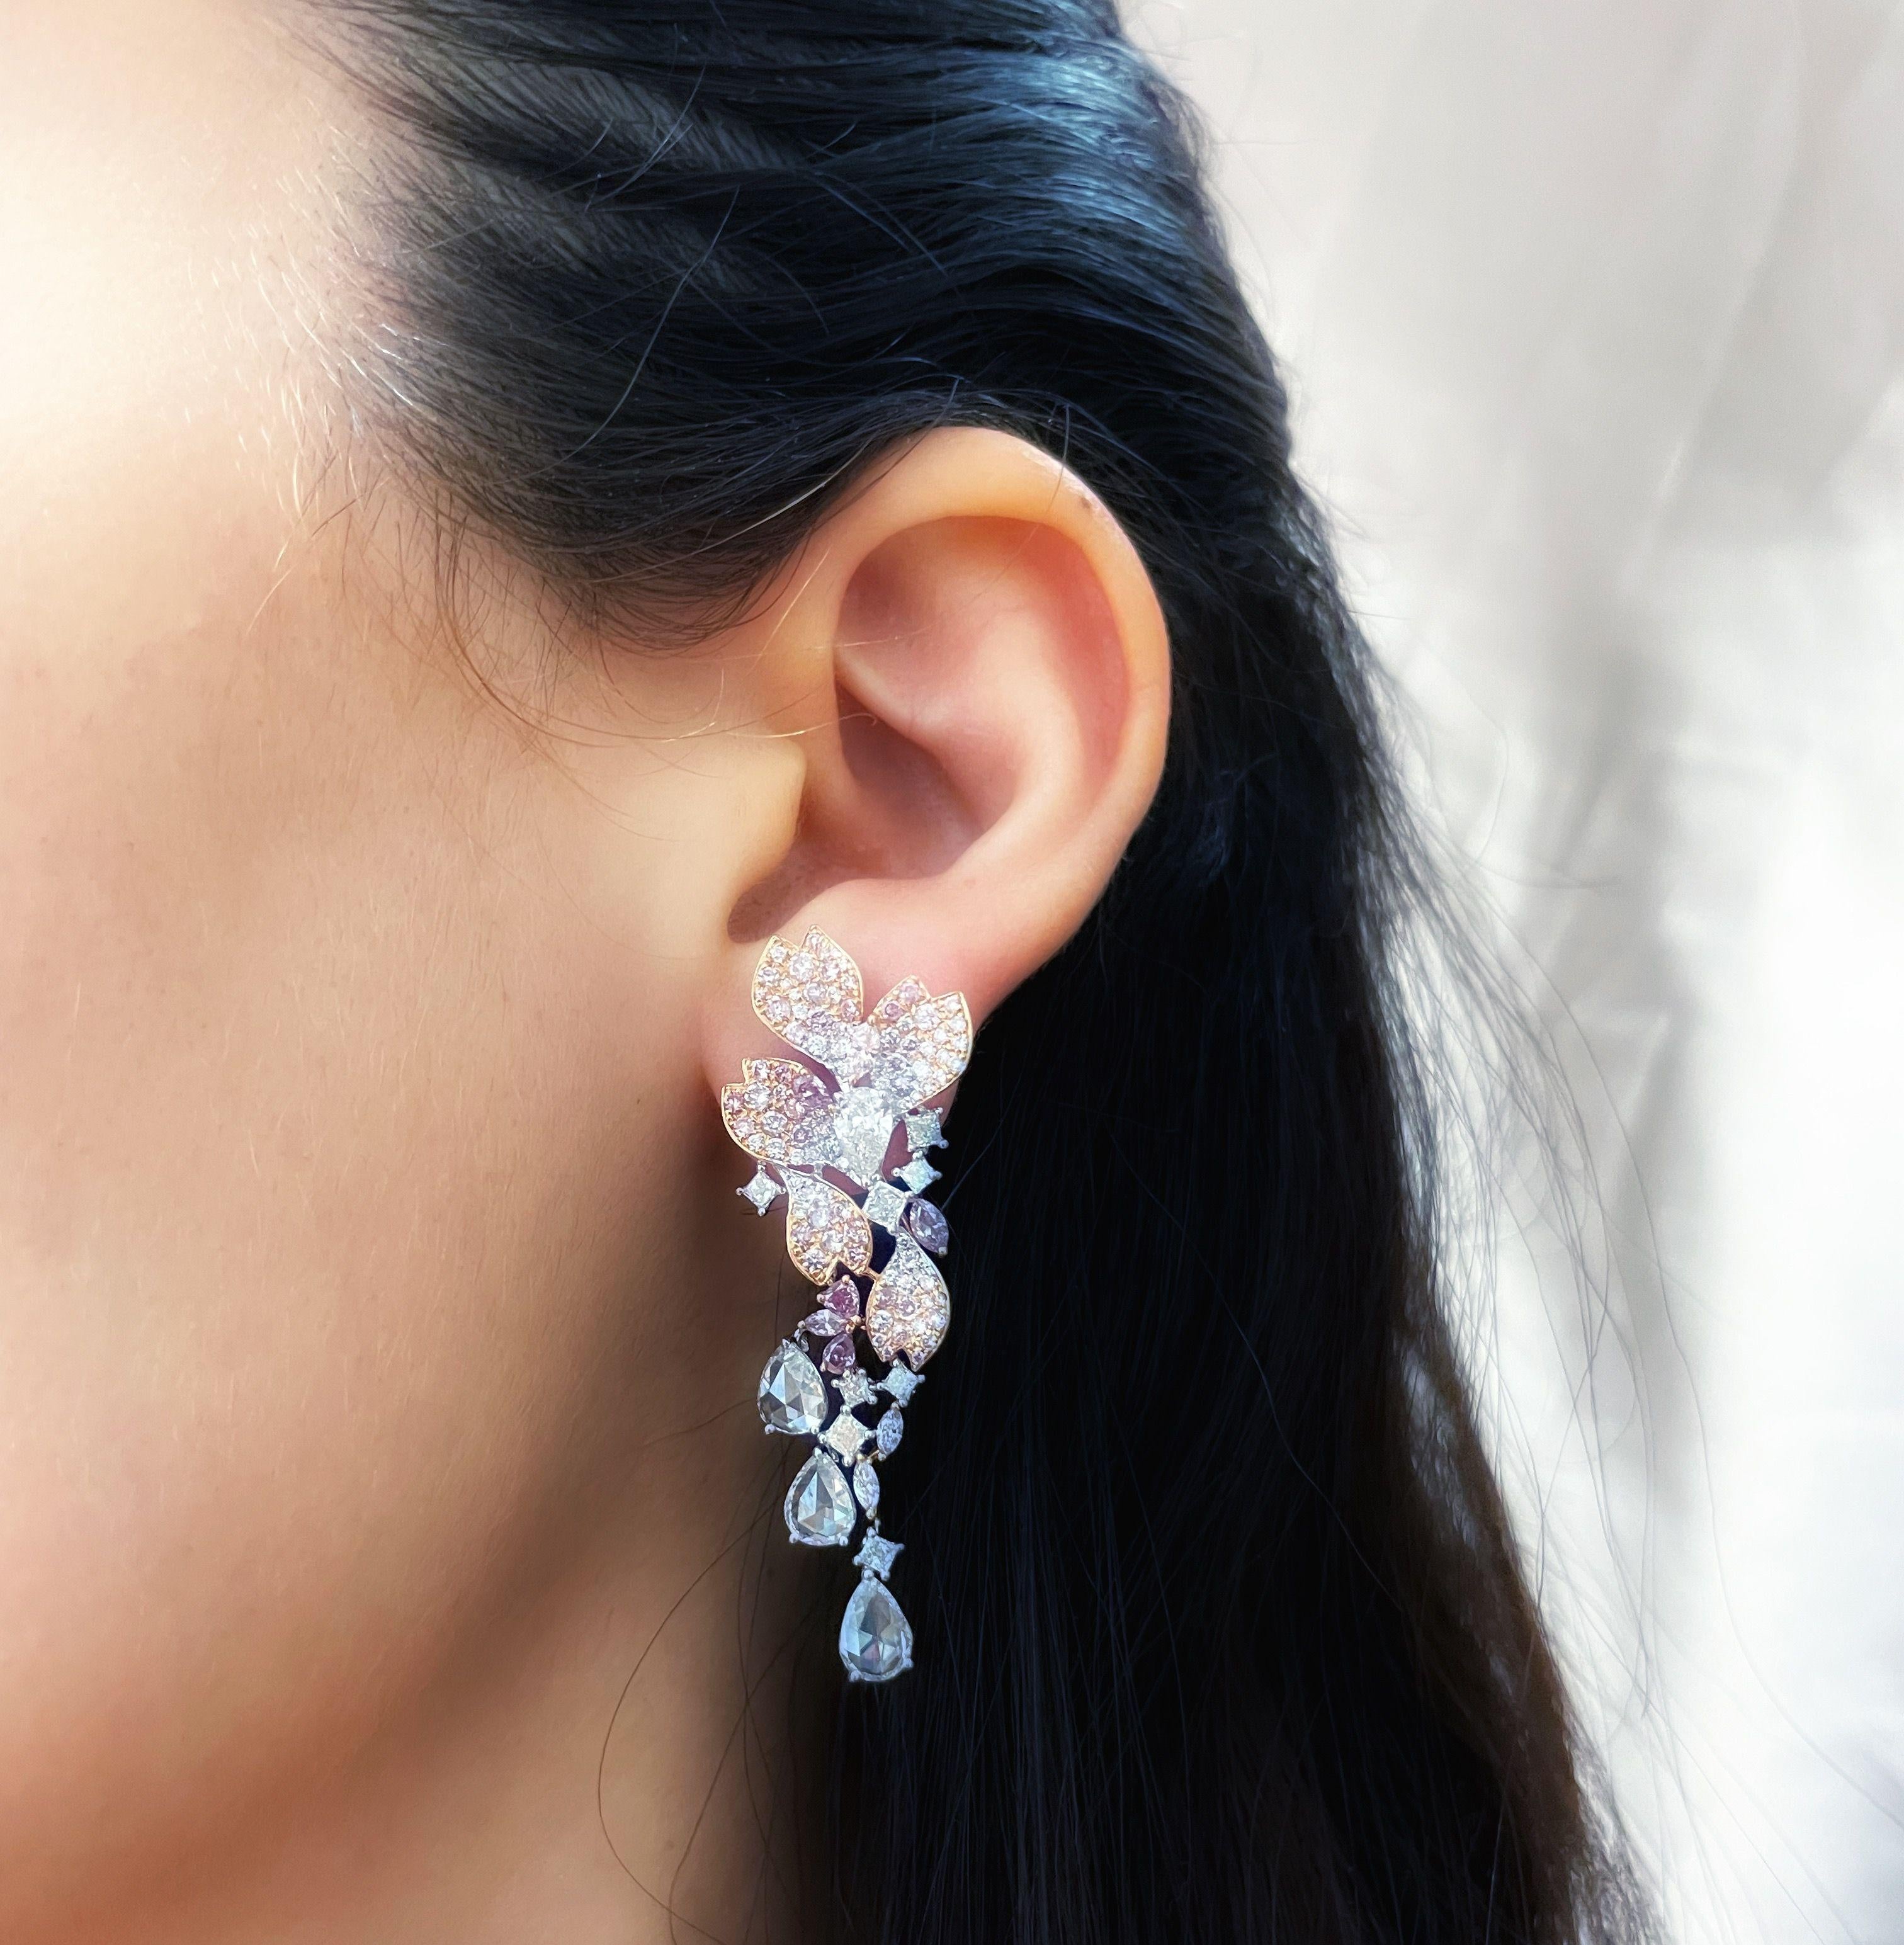 A stunning Victorian matched pair of 6.93 carat mix-shaped pink and white Diamond 18k rose and white Gold chandelier Drop Earrings.
These elegant and unique chandelier drop earrings showcase a beautiful mix of pear-shaped, marquis shaped and round